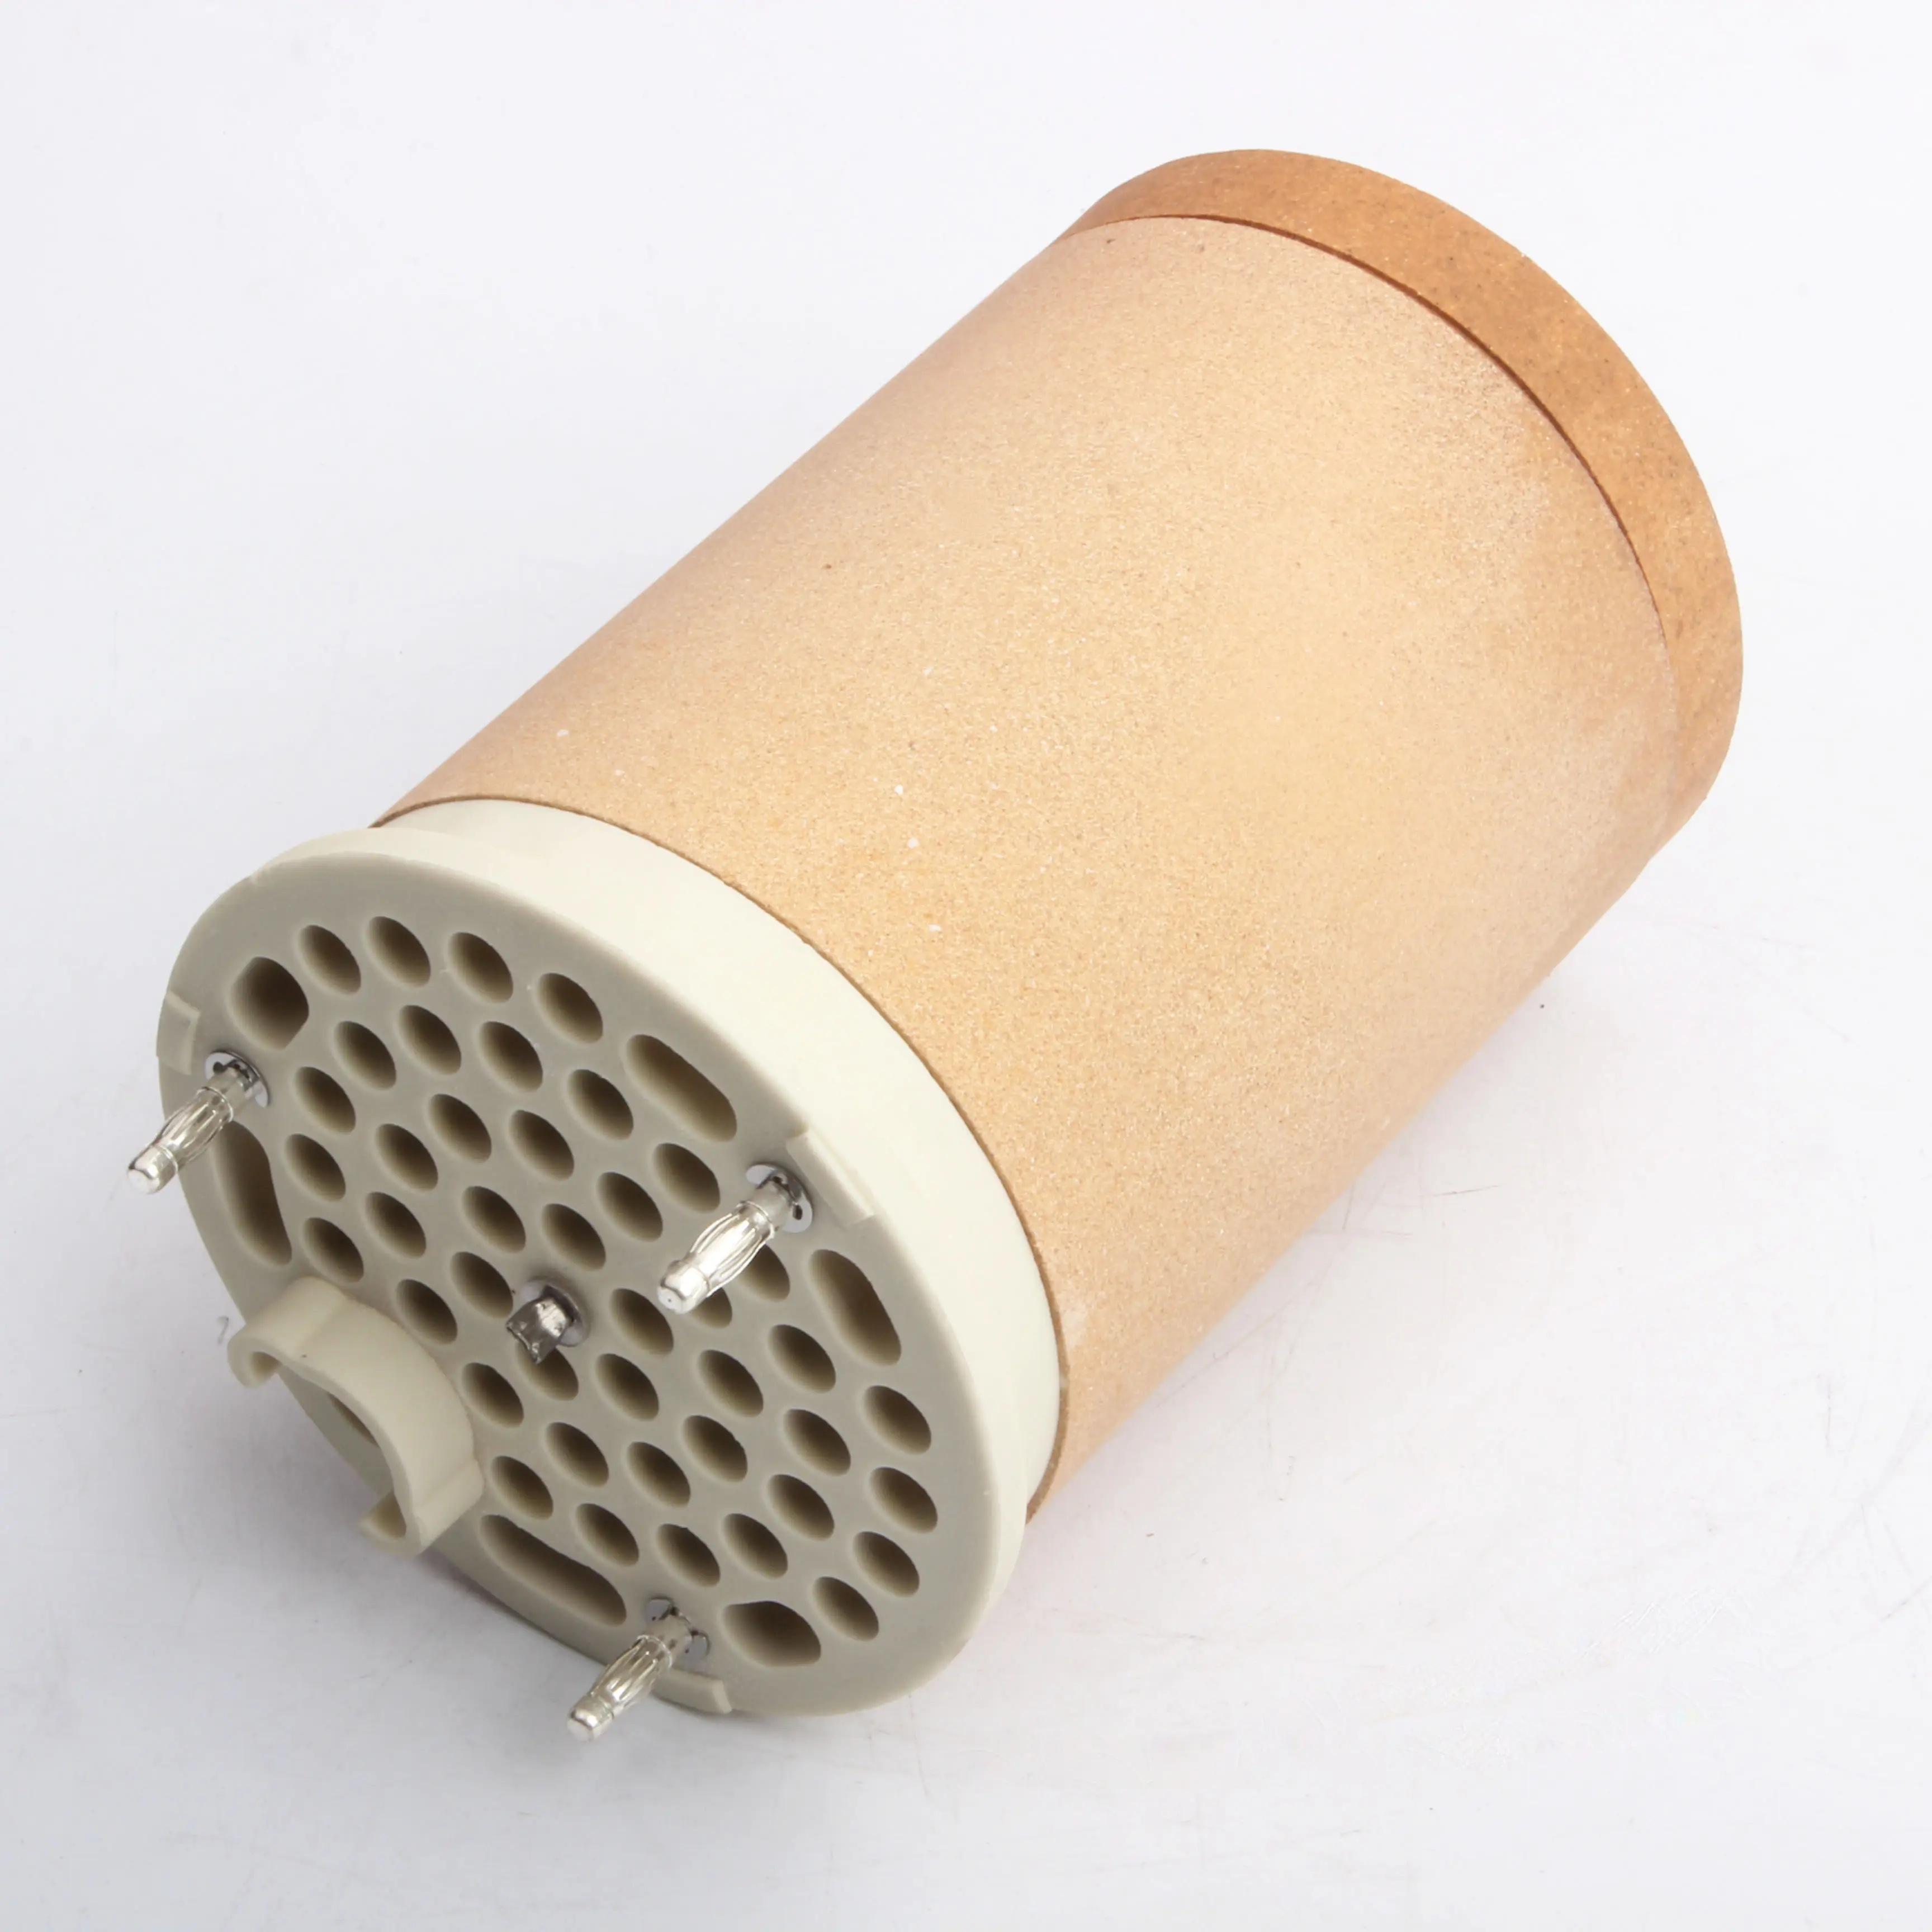 HEATFOUNDER Direct Sale 3x380v 15kw Ceramic Heating Cores Heating Elements Industrial